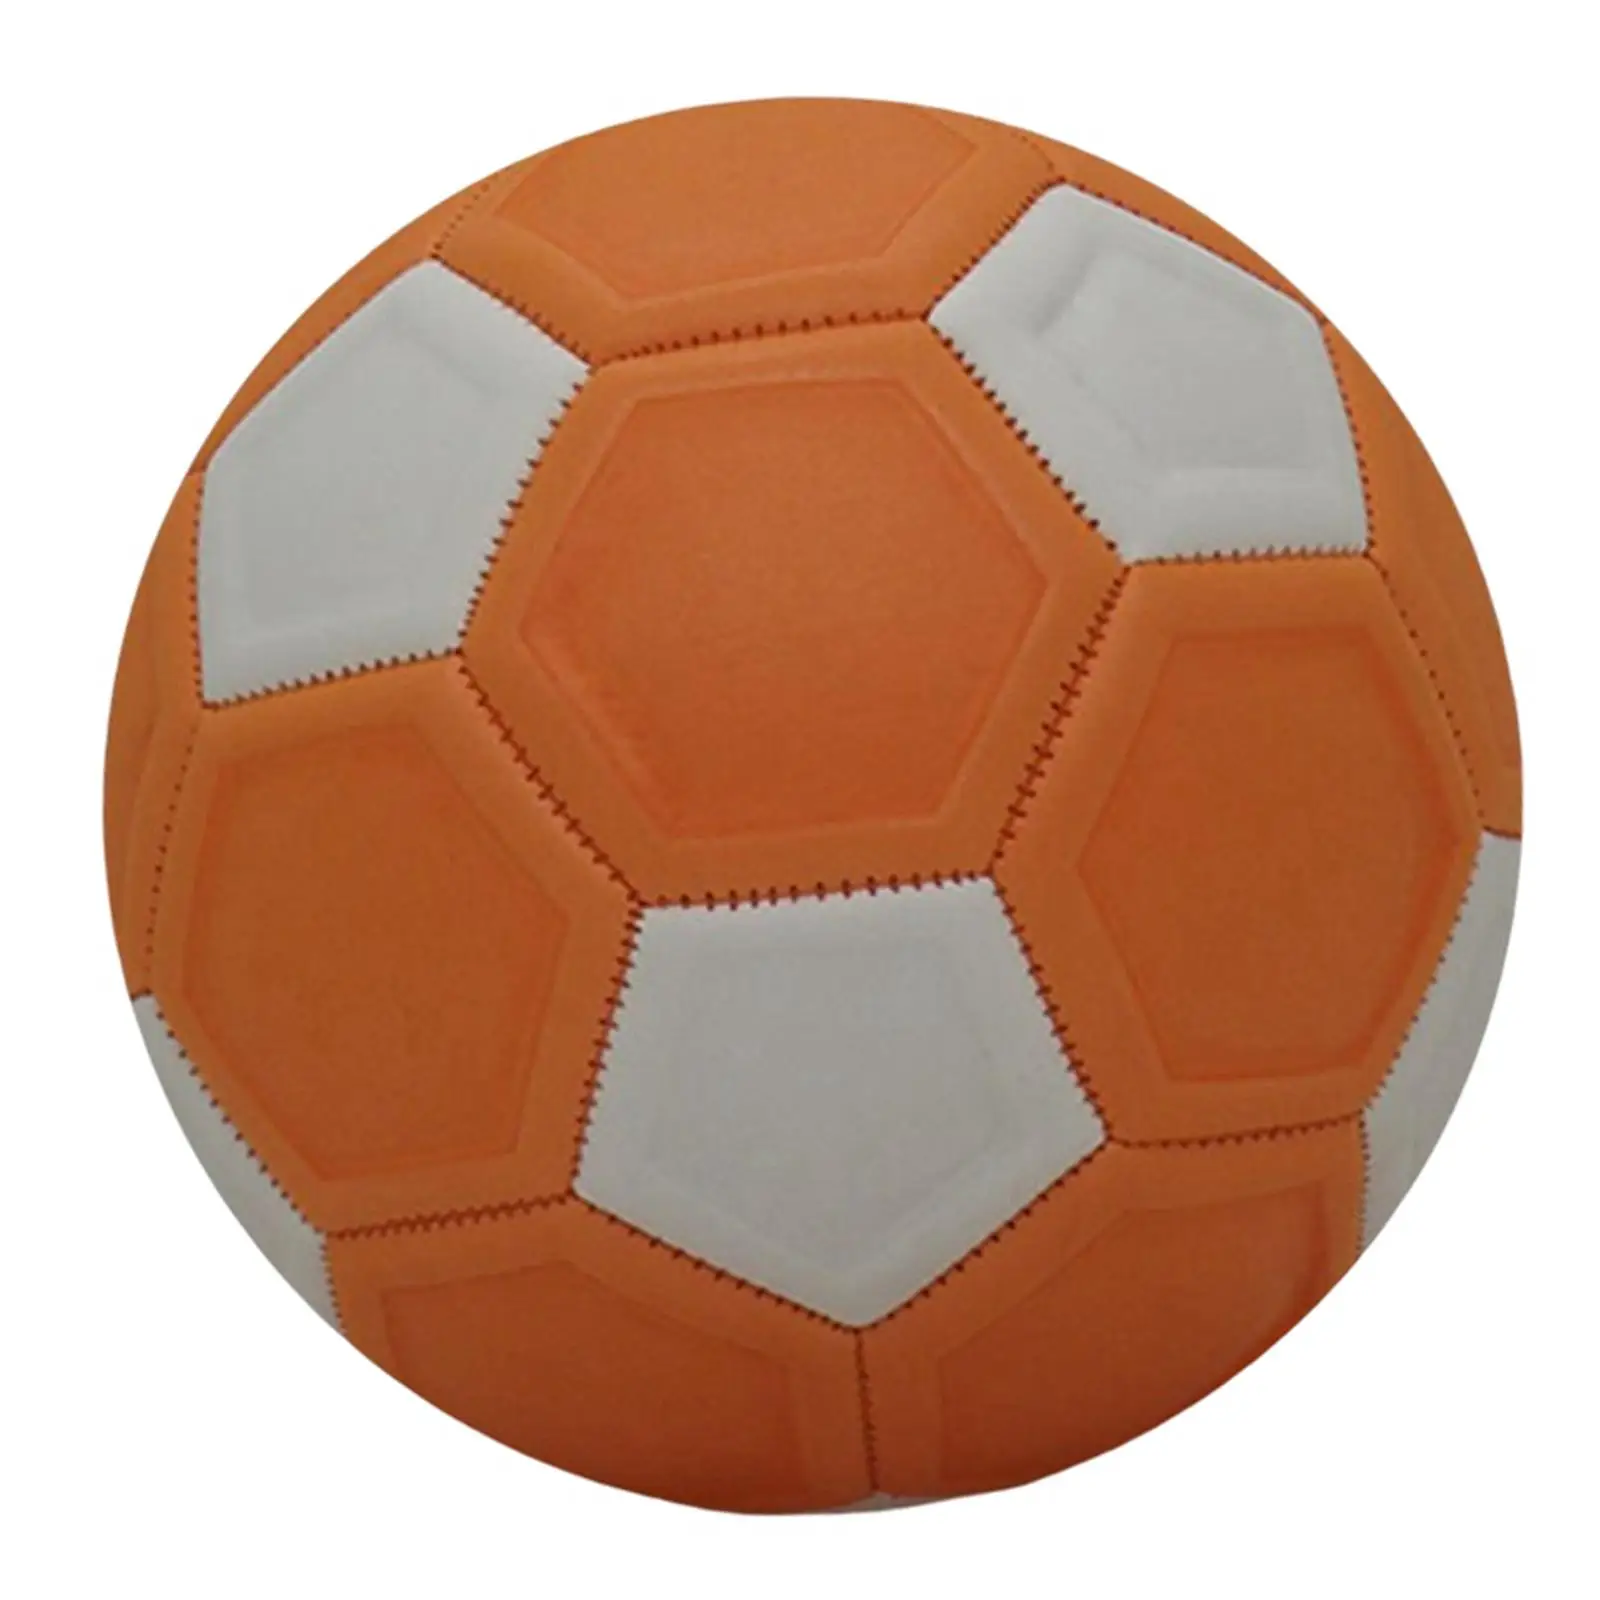 Soccer Bll Size 4 Gmes Prctice Plytime for ged 5 6 7 8 9 10 11 12 13 Toddlers